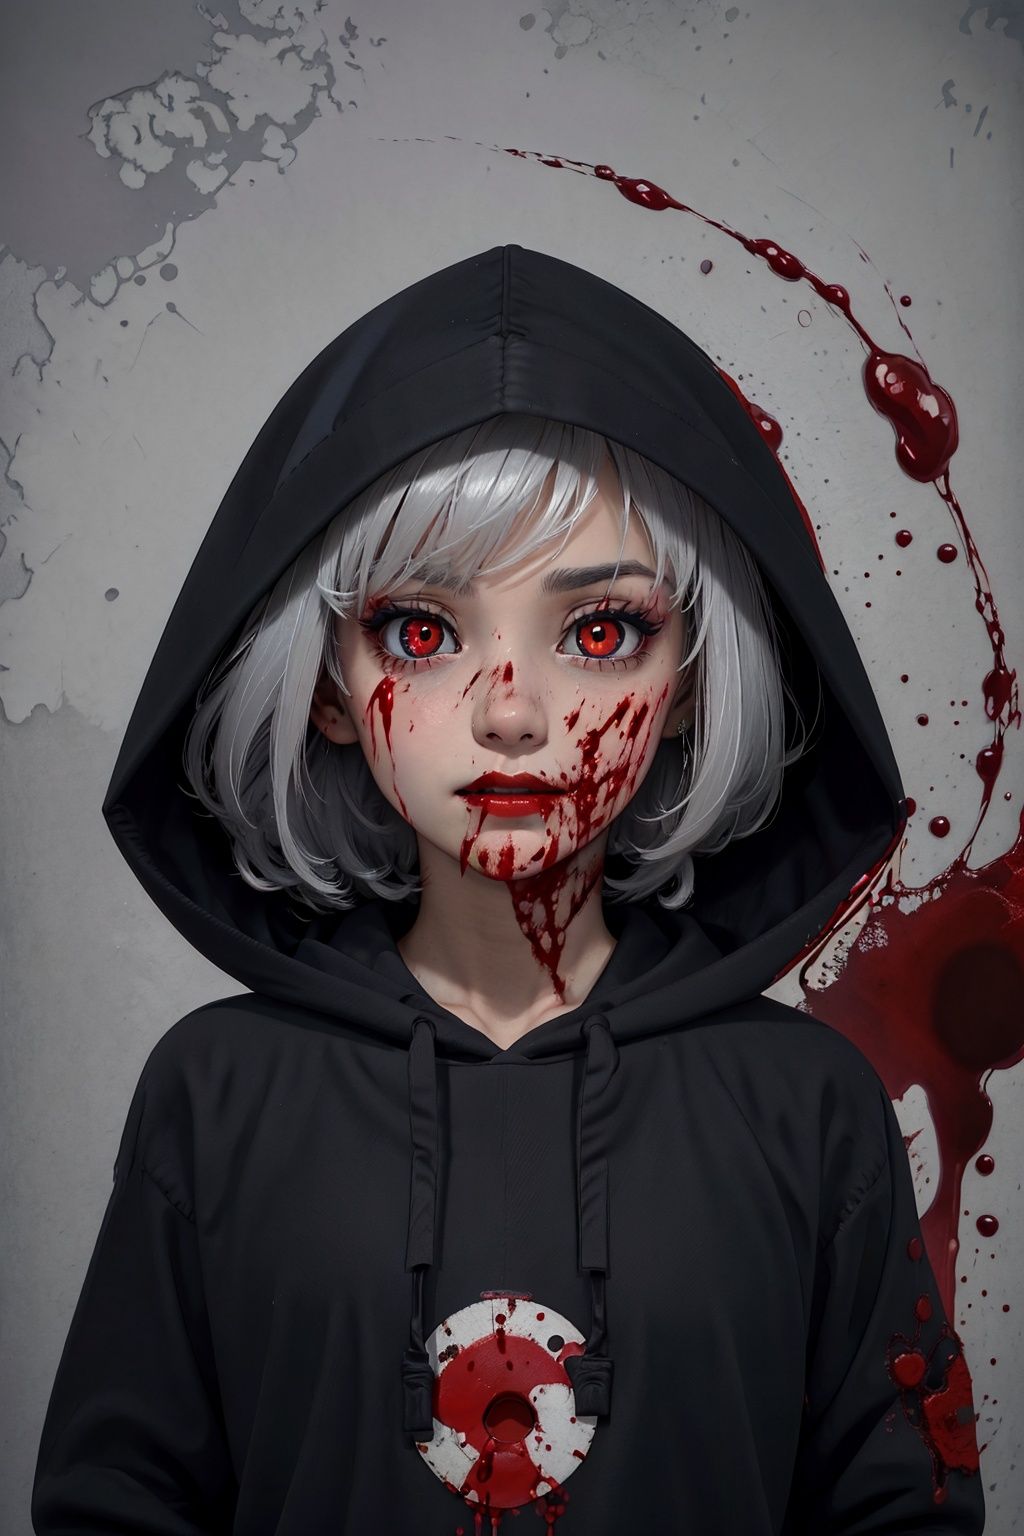 masterpiece, best quality, ultra high res,((blood on face, blood))

(dark art:1.3), deep shadow, dark theme,

1girl, solo,

(black hood,hood up,silver hair,short hair),grey hair,red eyes,long sleeves,

,constricted pupils, small pupils,

,CRAZY FACE,CRAZY EYES,CRAZY SMILE,SHOCKED,HORRIFIED,SCARED,SMALL PUPILS,CONSTRICTED PUPILS,

,Tiancheng:1.0,

  ,